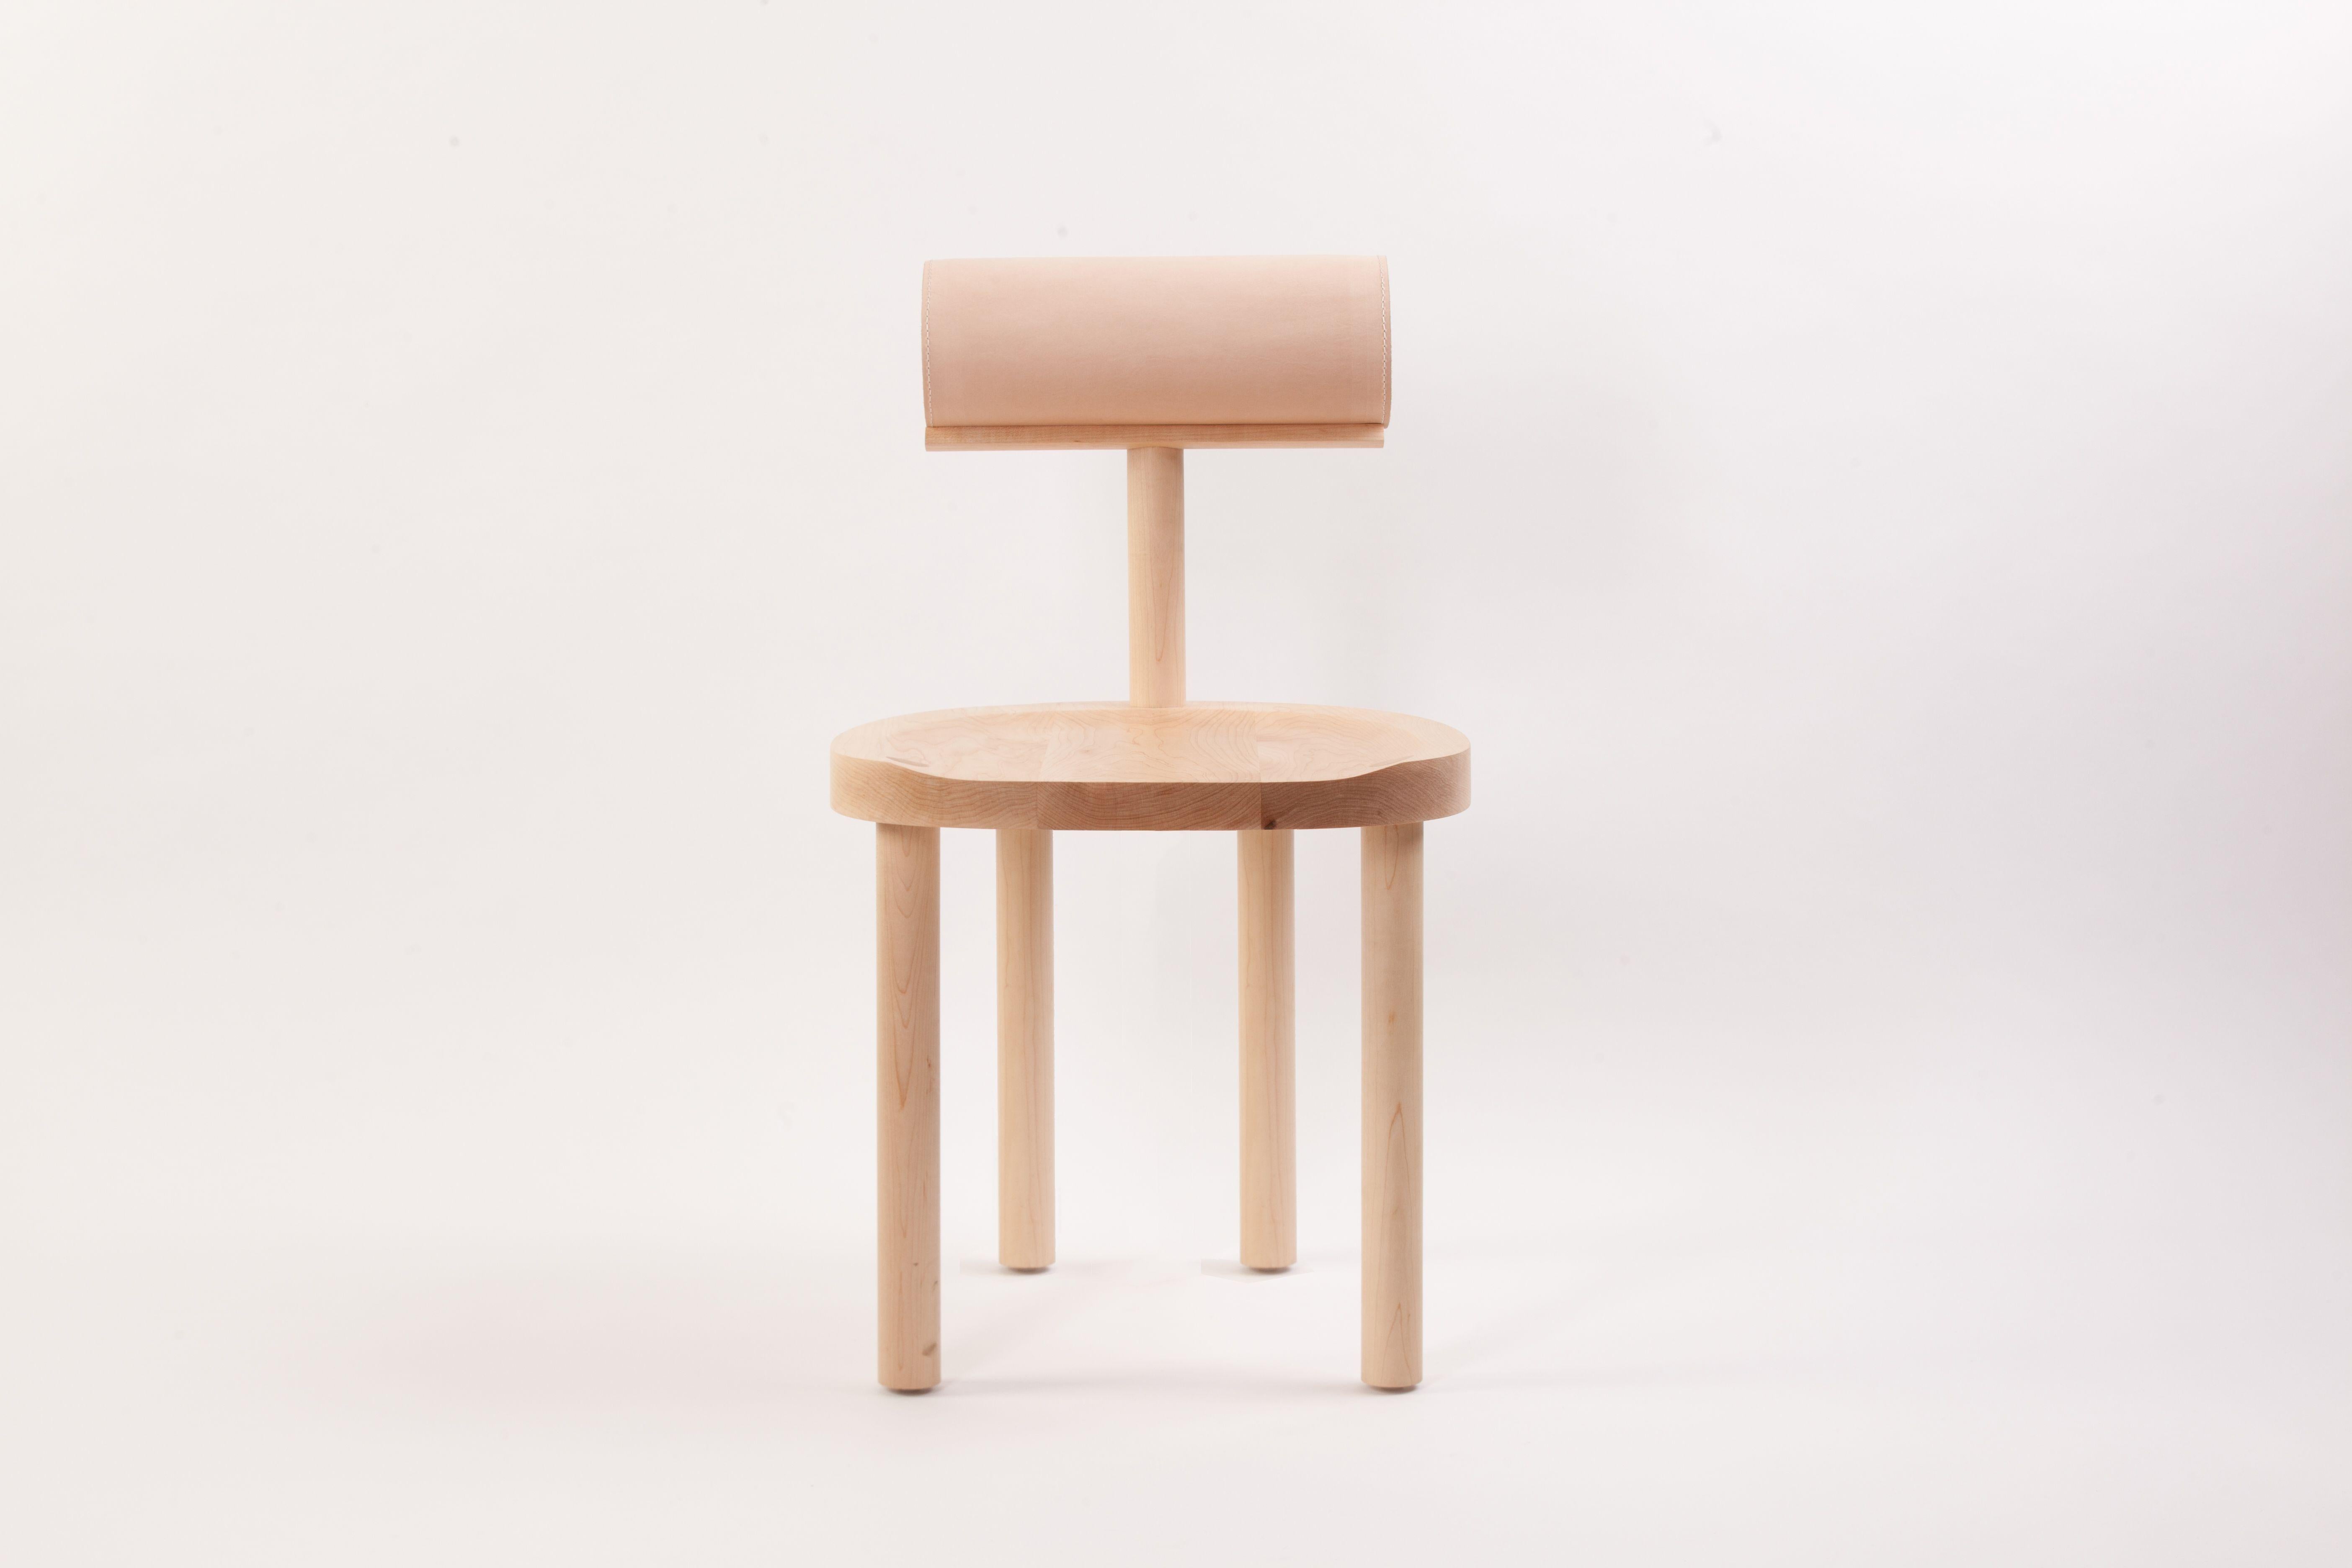 Una Maple chair by Estudio Persona
Dimensions: W 45.7 x D 48.3 x H 78.8 cm
Materials: Solid maple, natural vegetable leather

Solid maple, upholstered back bolster in natural vegetable leather.

Also available in solid ash ans black natural